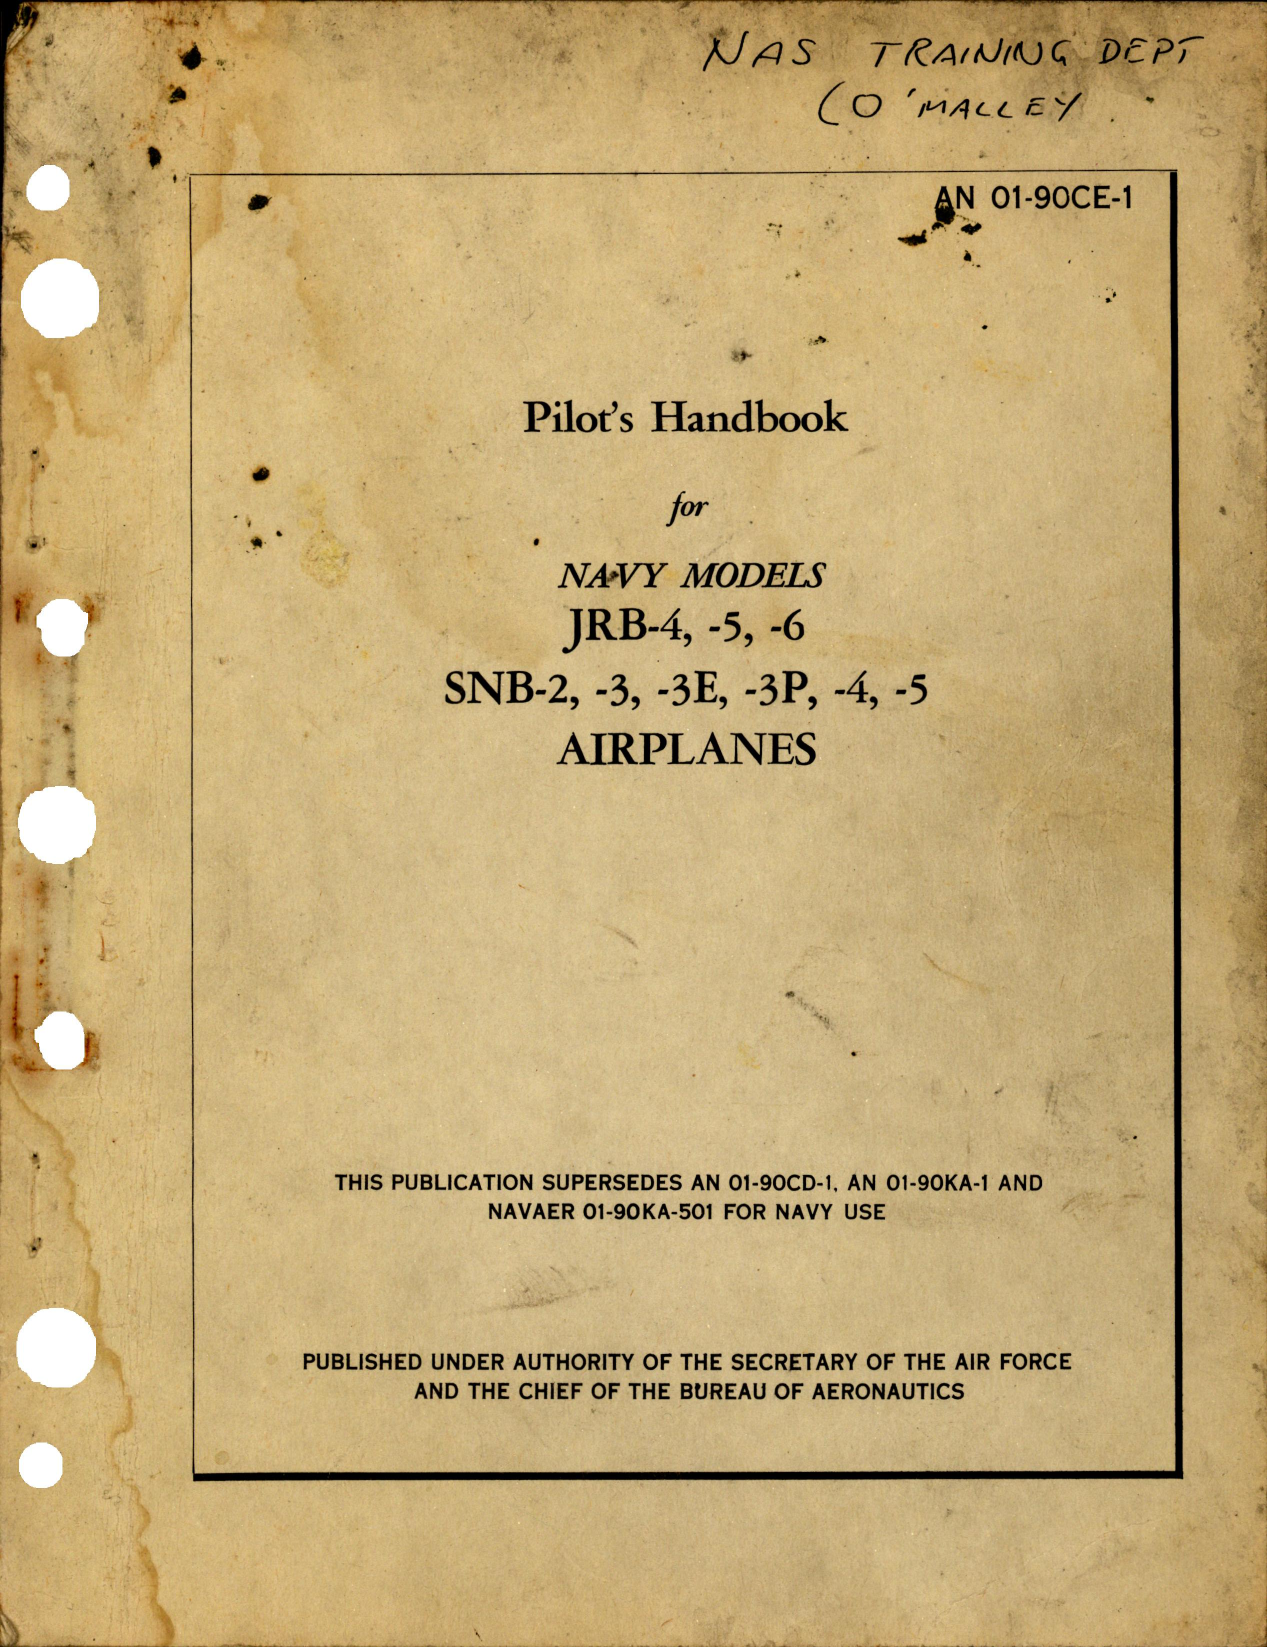 Sample page 1 from AirCorps Library document: Pilot's Handbook for JRB-4, -5, -6, SNB-2, -3, -3E, -3P, -4, and -5